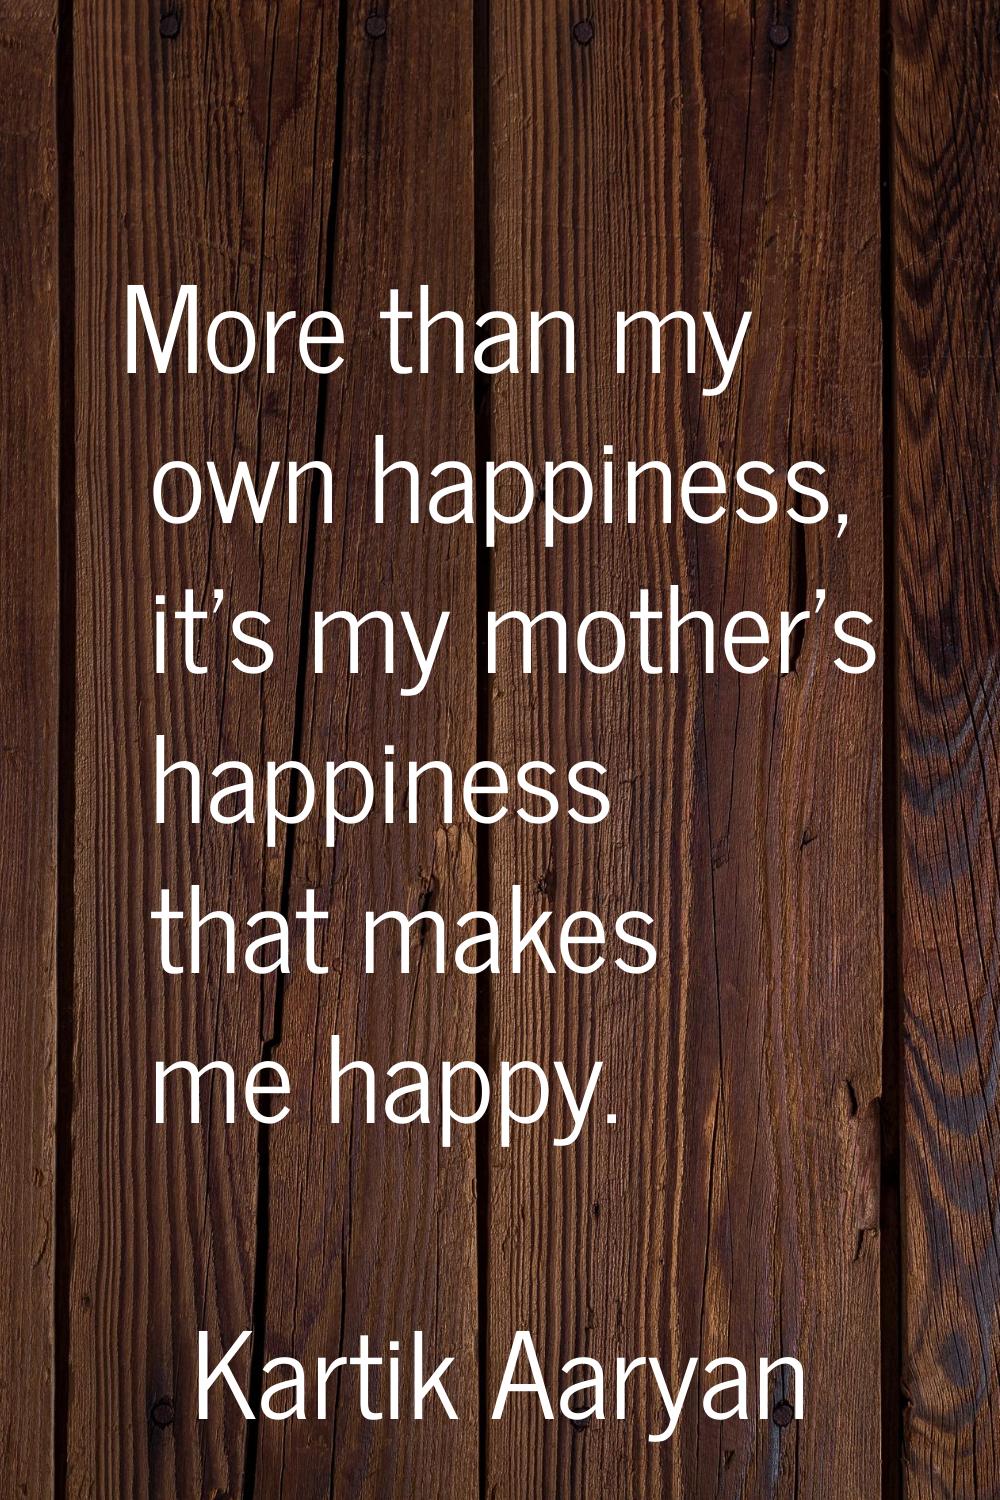 More than my own happiness, it's my mother's happiness that makes me happy.